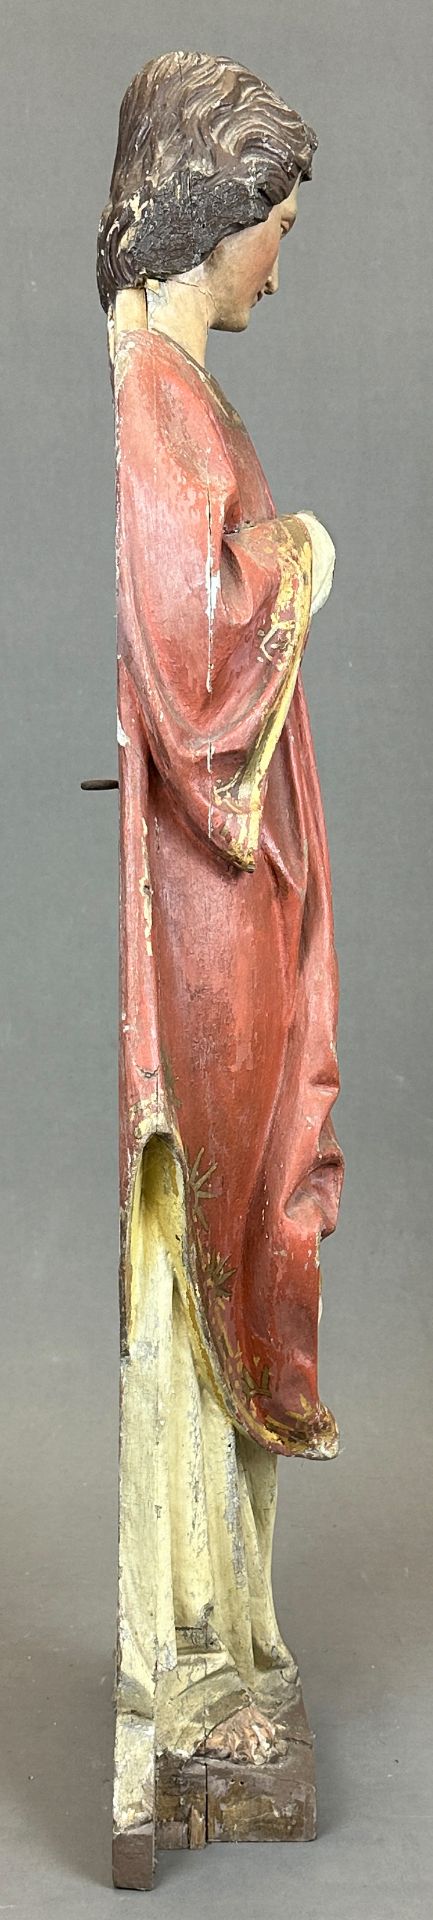 Wooden figure. St Nepomuk. 1st half of the 19th century. Germany. - Image 5 of 13